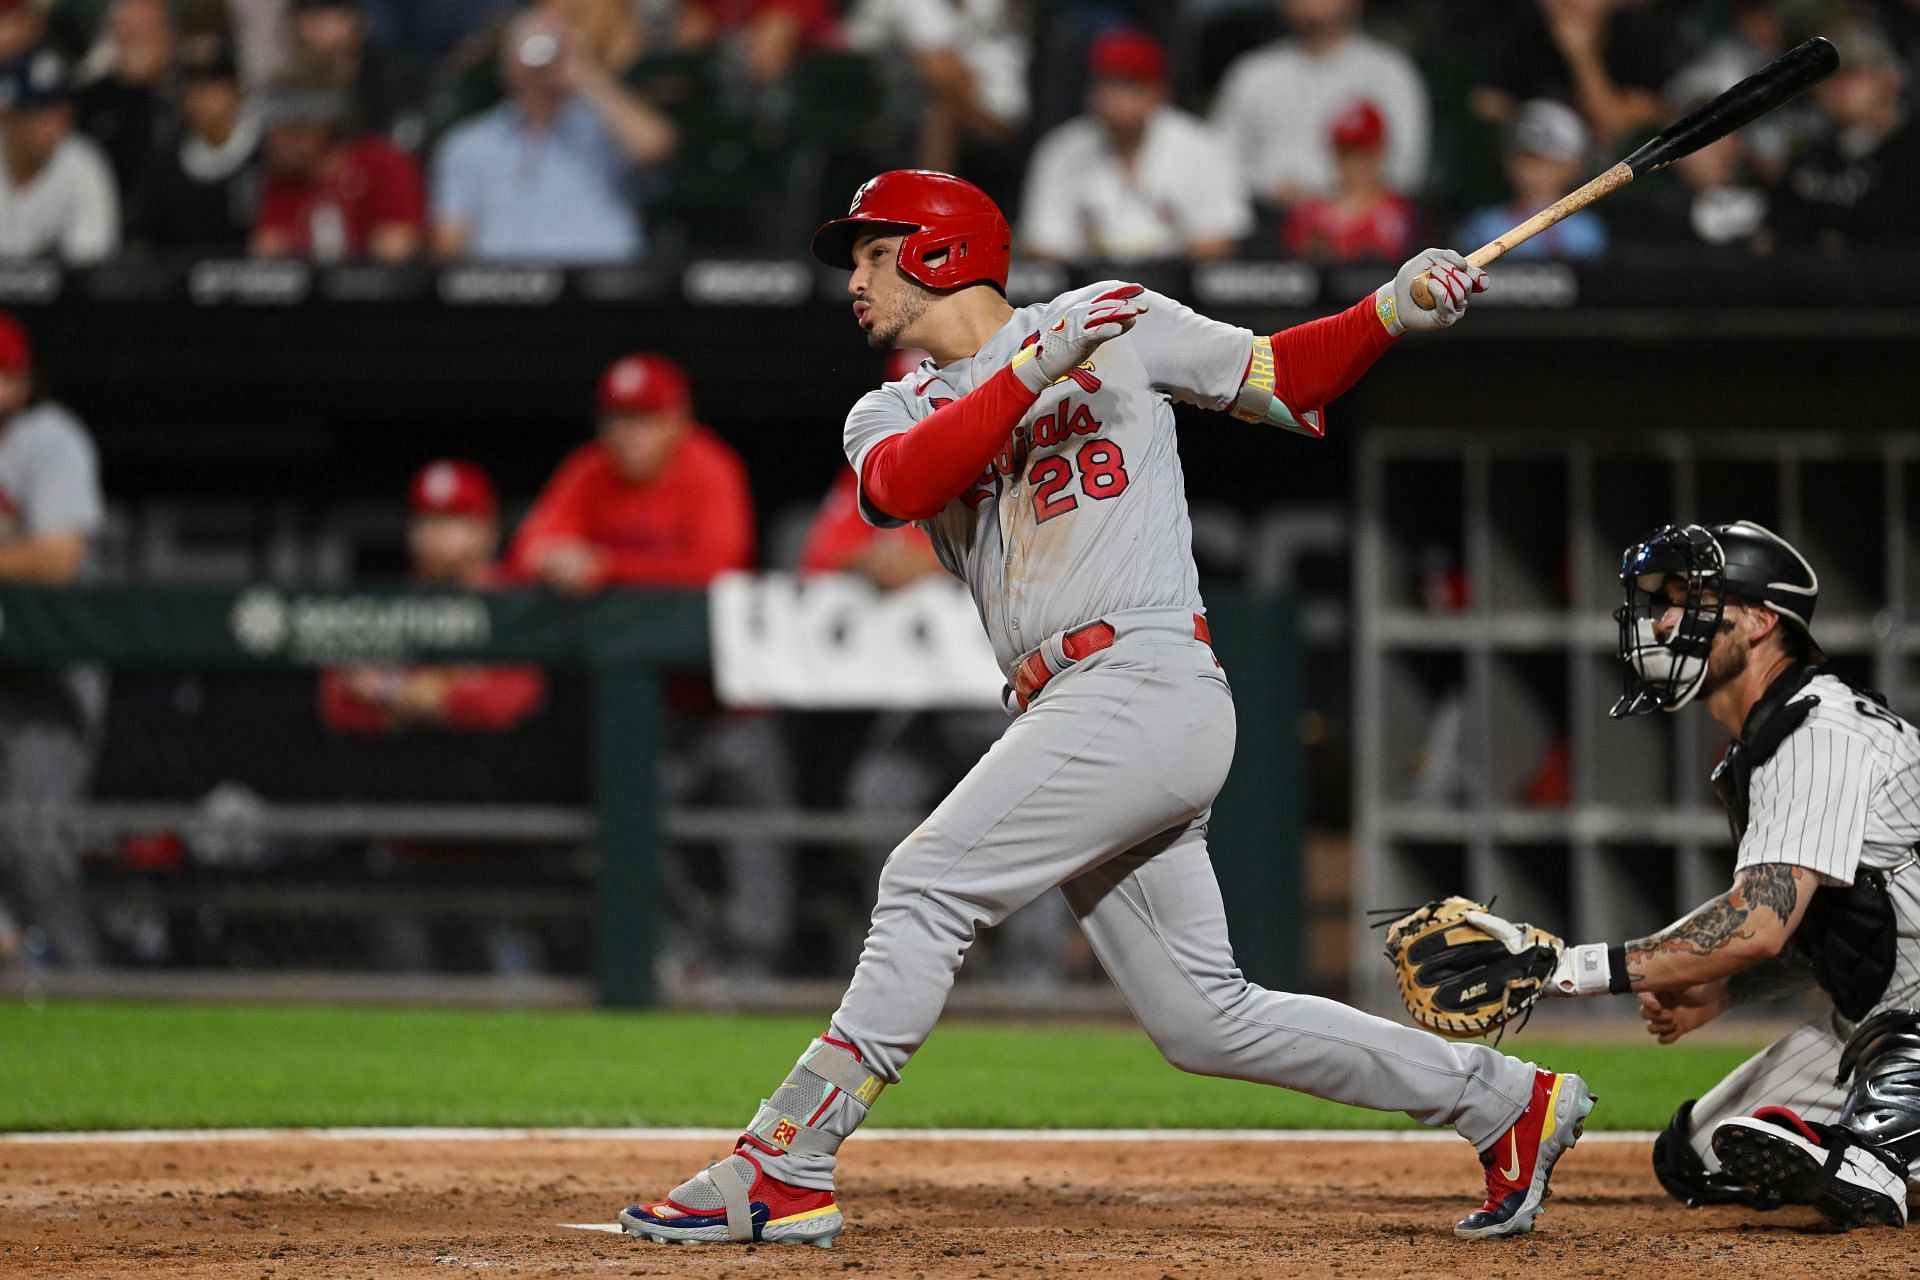 Nolan Arenado of the St. Louis Cardinals hits a home run against the Chicago White Sox at Guaranteed Rate Field